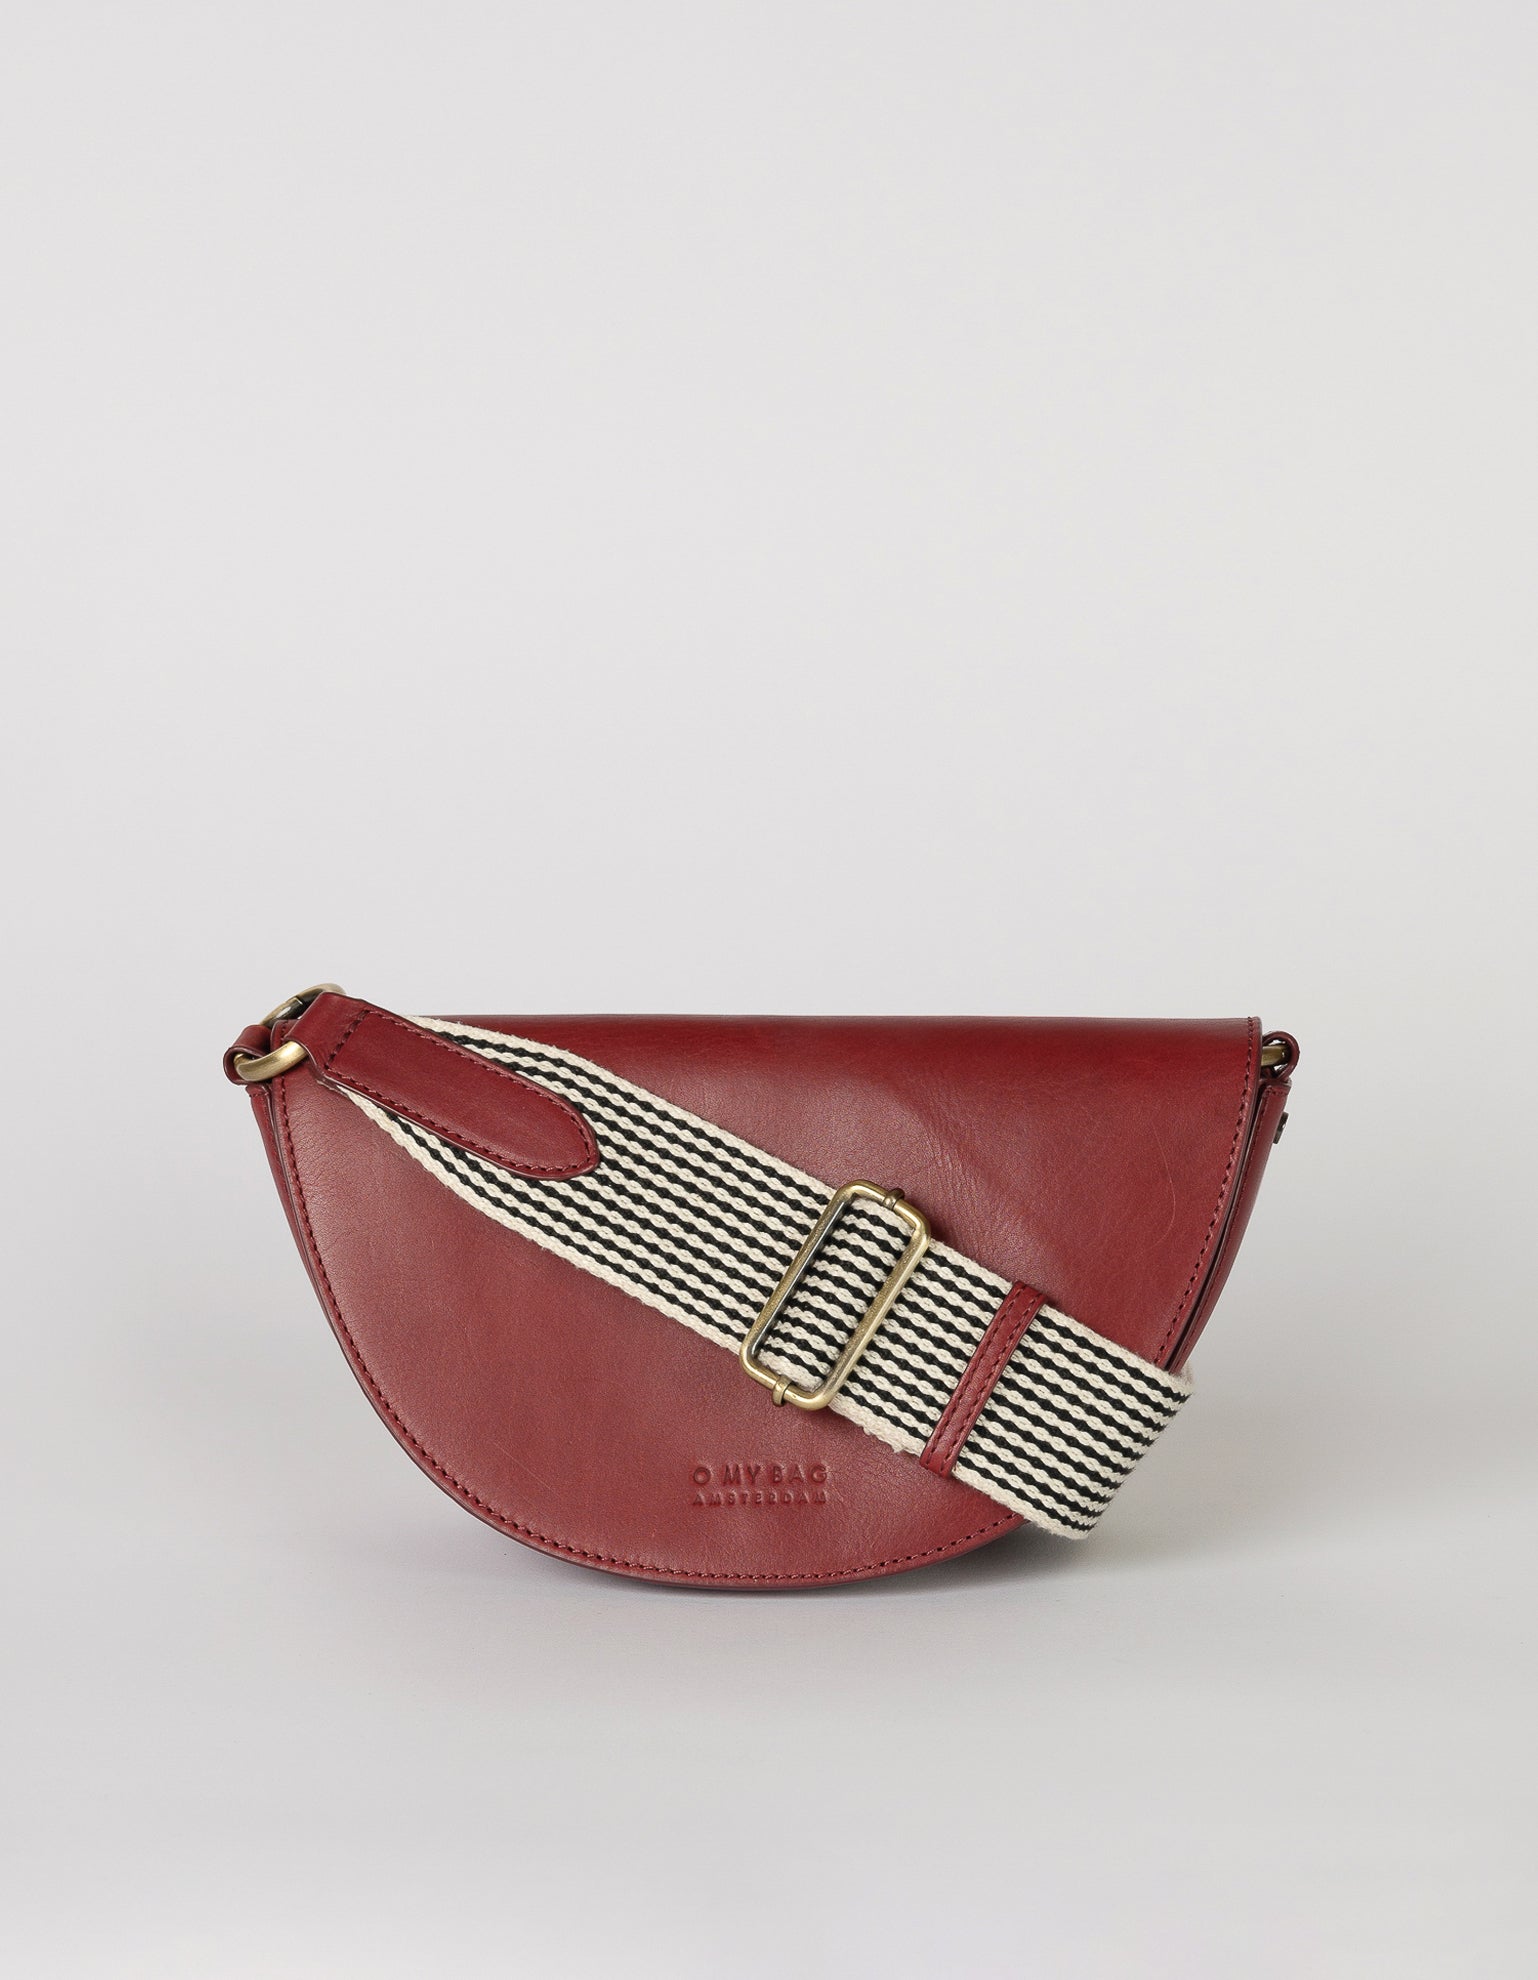 Laura Bag in Ruby Classic Leather ft. Checkered Webbing Strap - Front product image